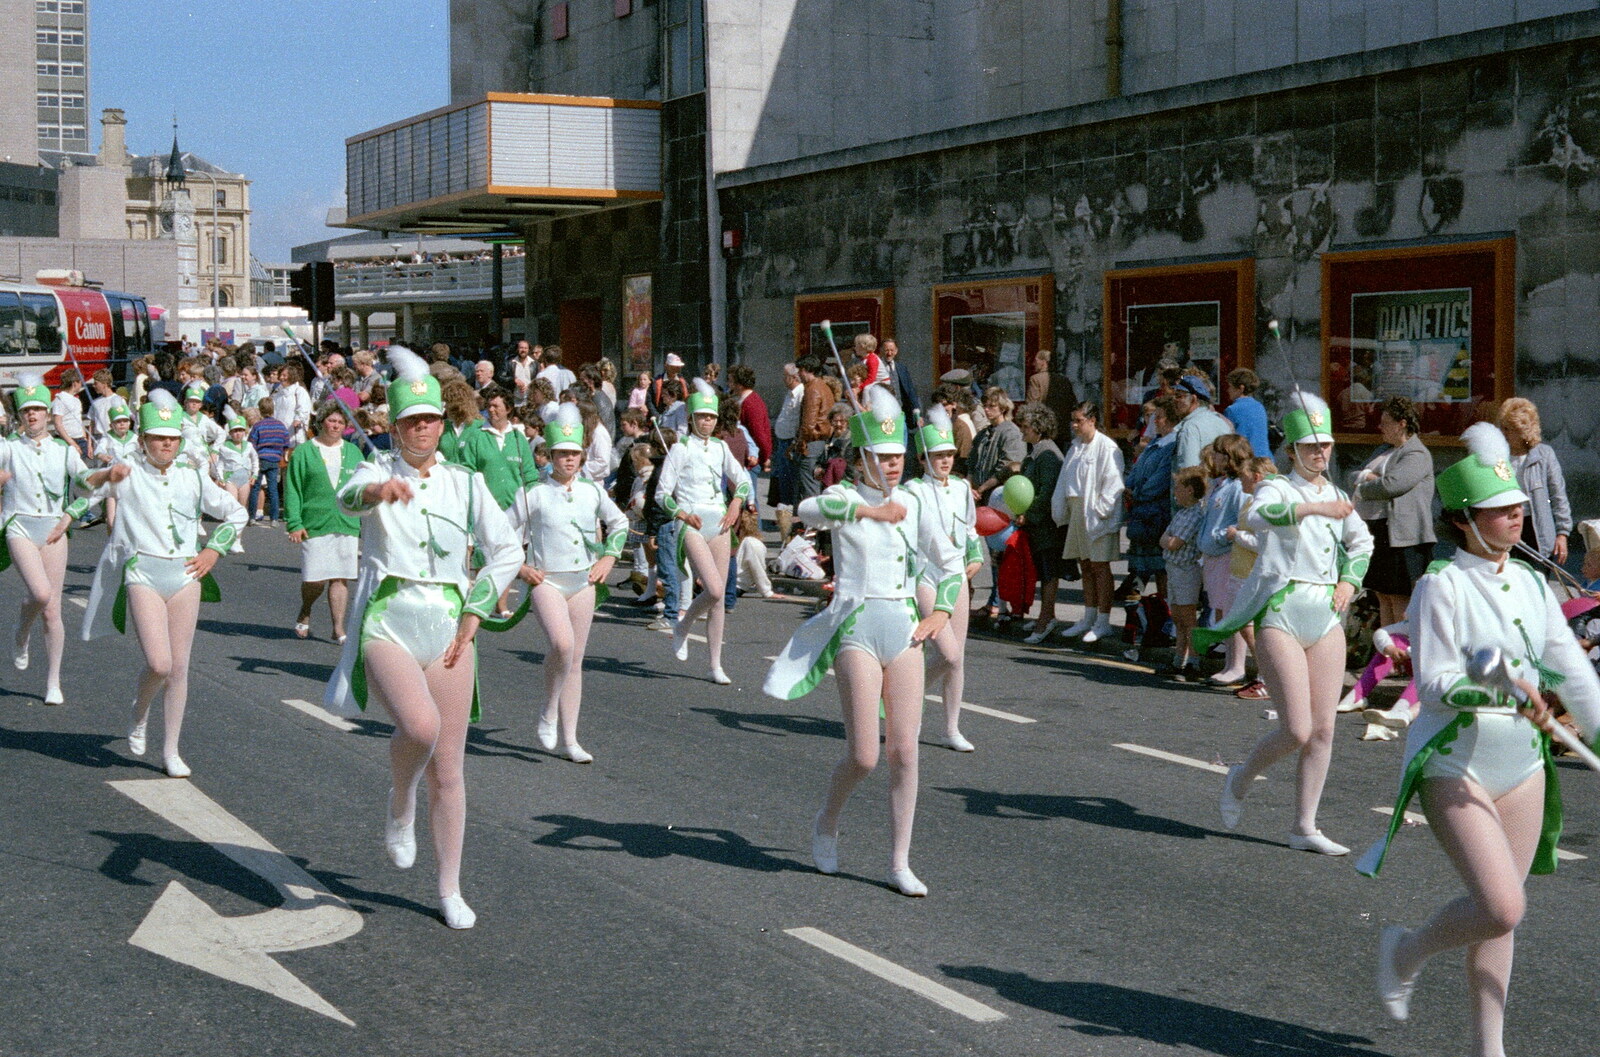 Majorettes on Union Street from Uni: The Lord Mayor's Procession, Plymouth, Devon - 21st May 1986